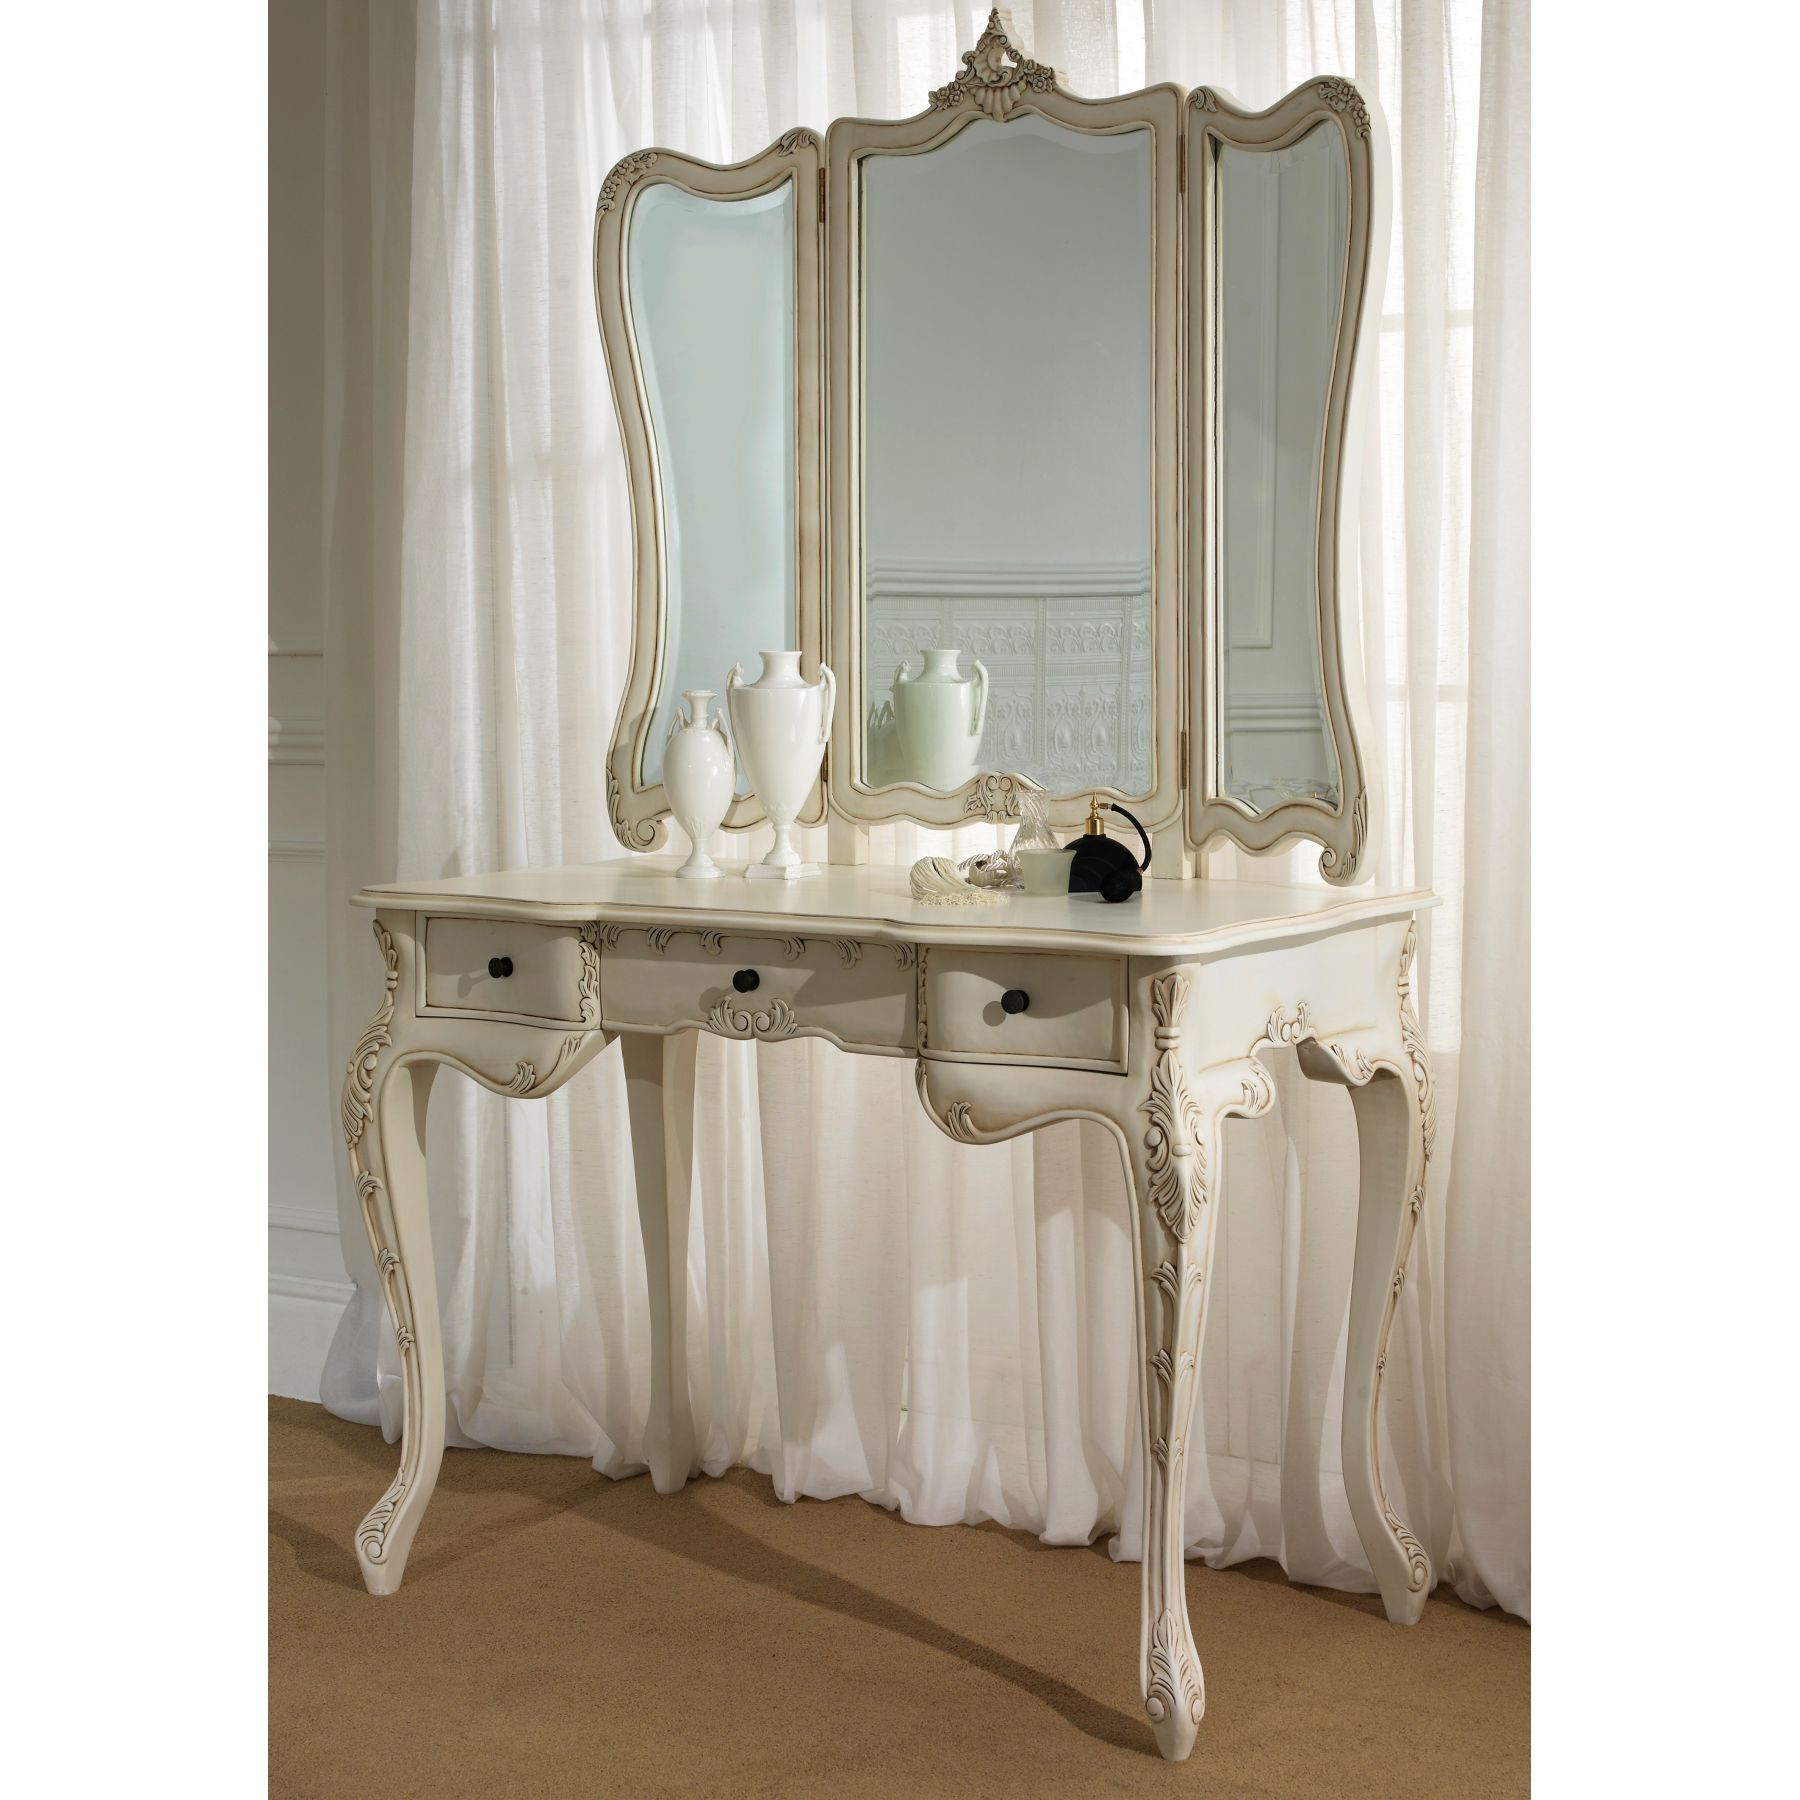 Decoration Antique Wooden Dressing Table With Three Drawers As Throughout Decorative Dressing Table Mirrors (View 3 of 15)